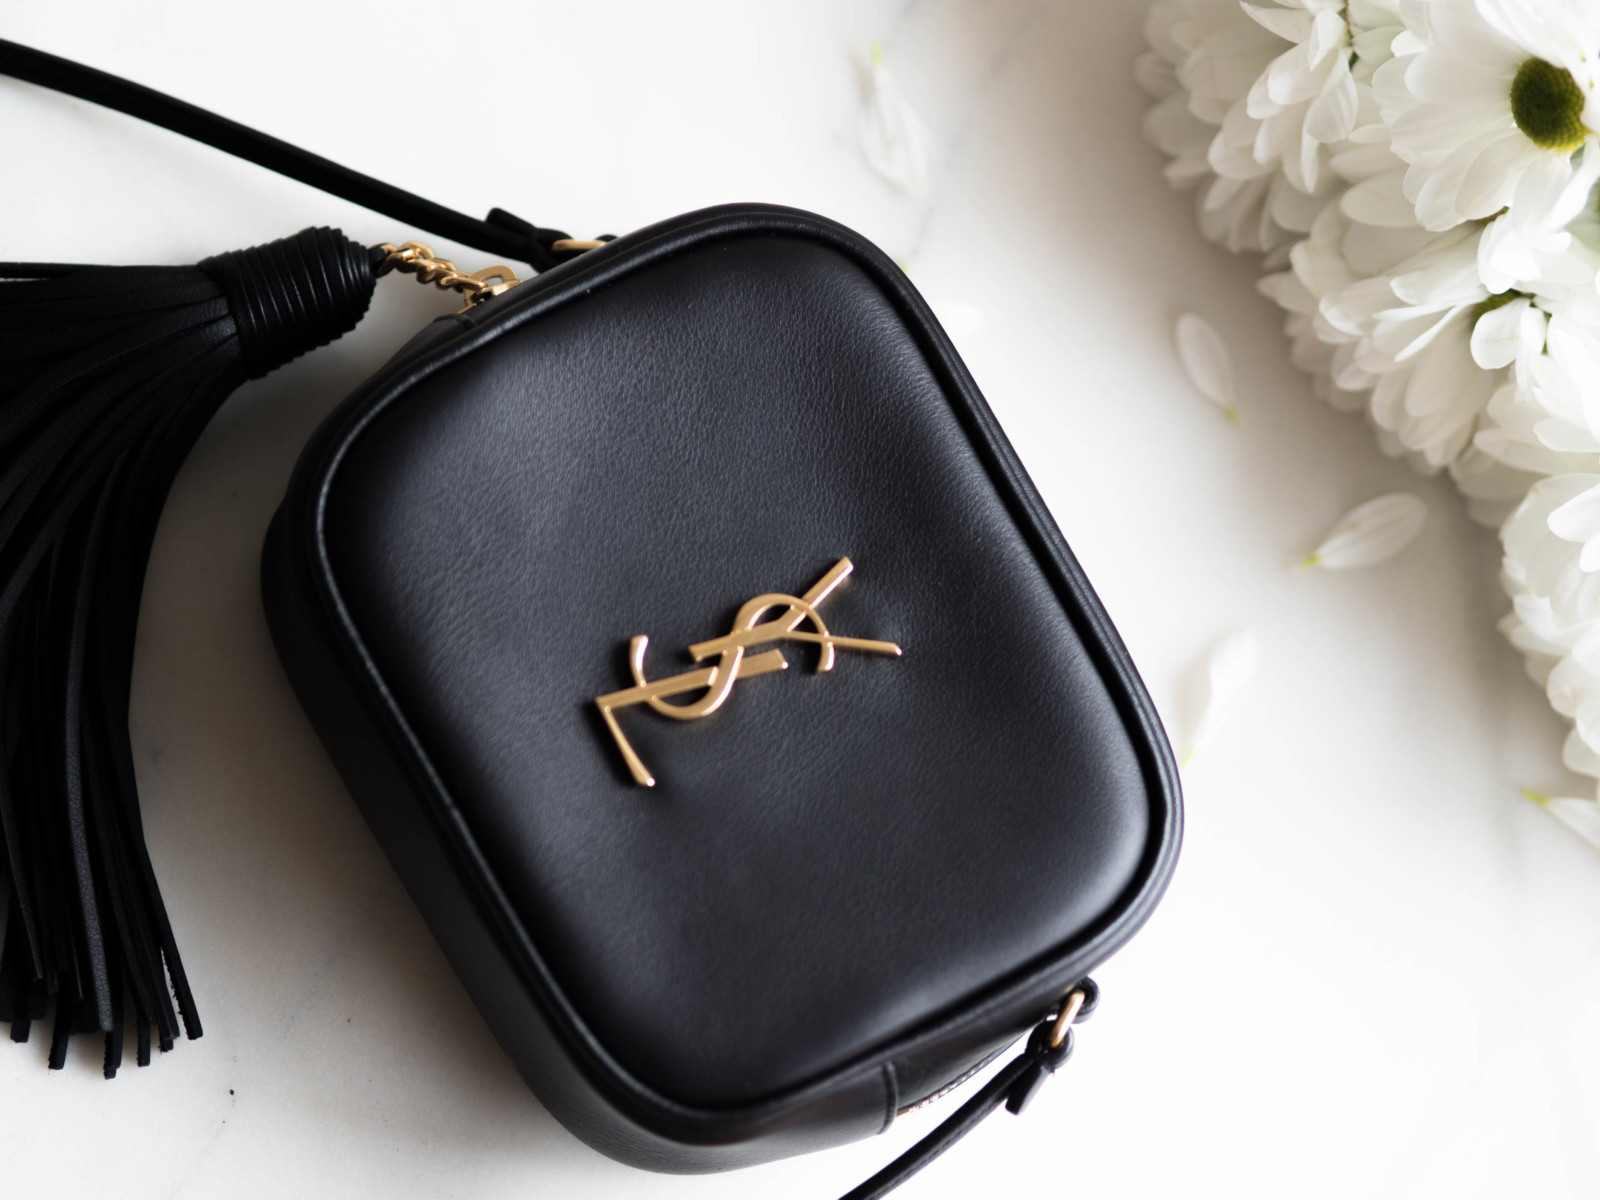 VIDEO: YSL Blogger Monogram Bag review & What fits inside - Ciara O' Doherty